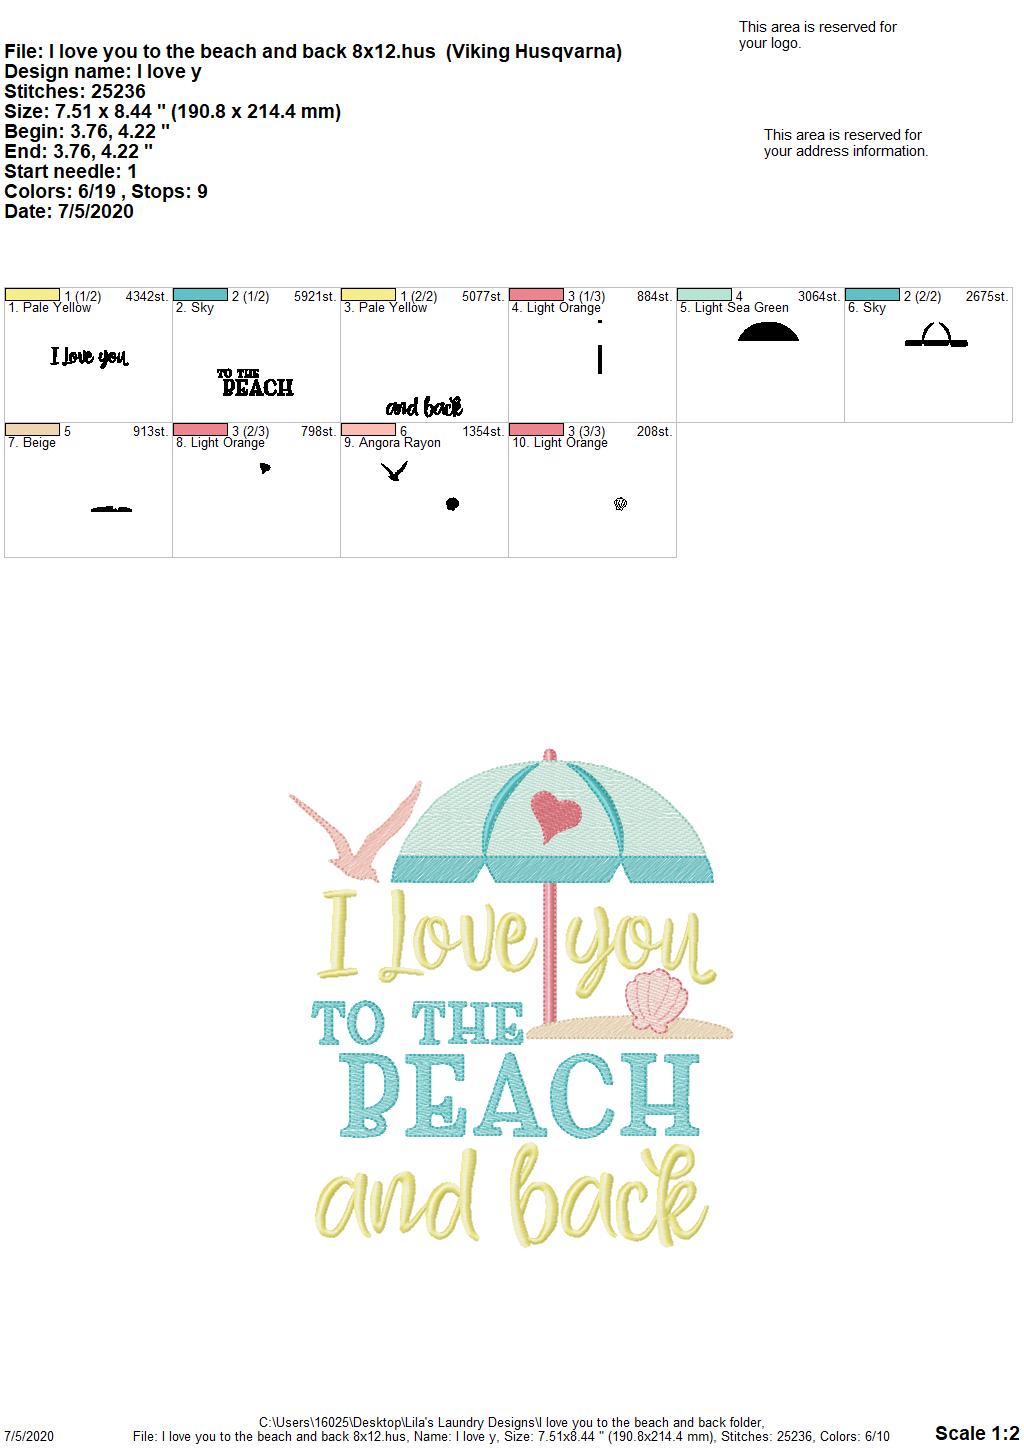 I Love You To The Beach And Back - 3 Sizes - Digital Embroidery Design